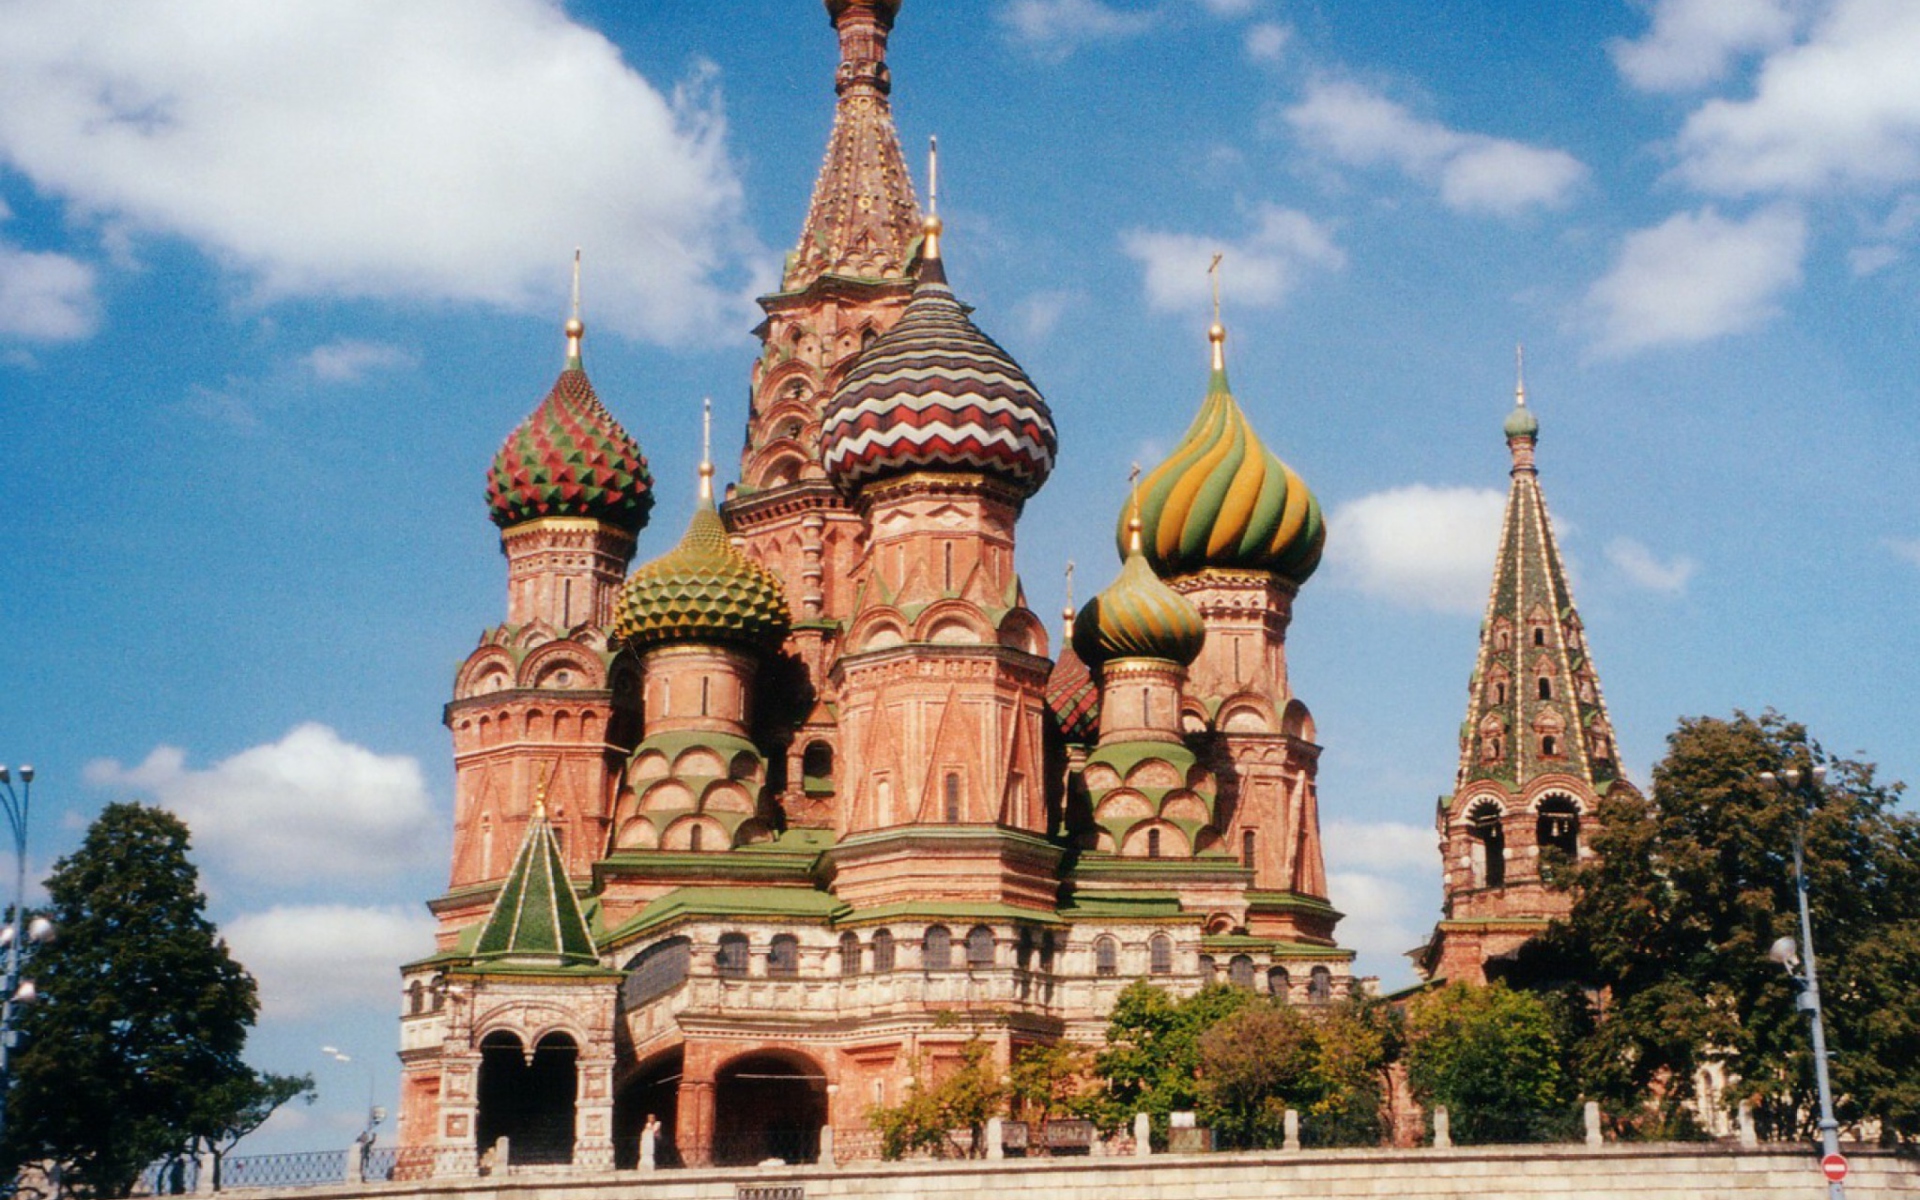 St. Basil's Cathedral On Red Square, Moscow screenshot #1 1920x1200